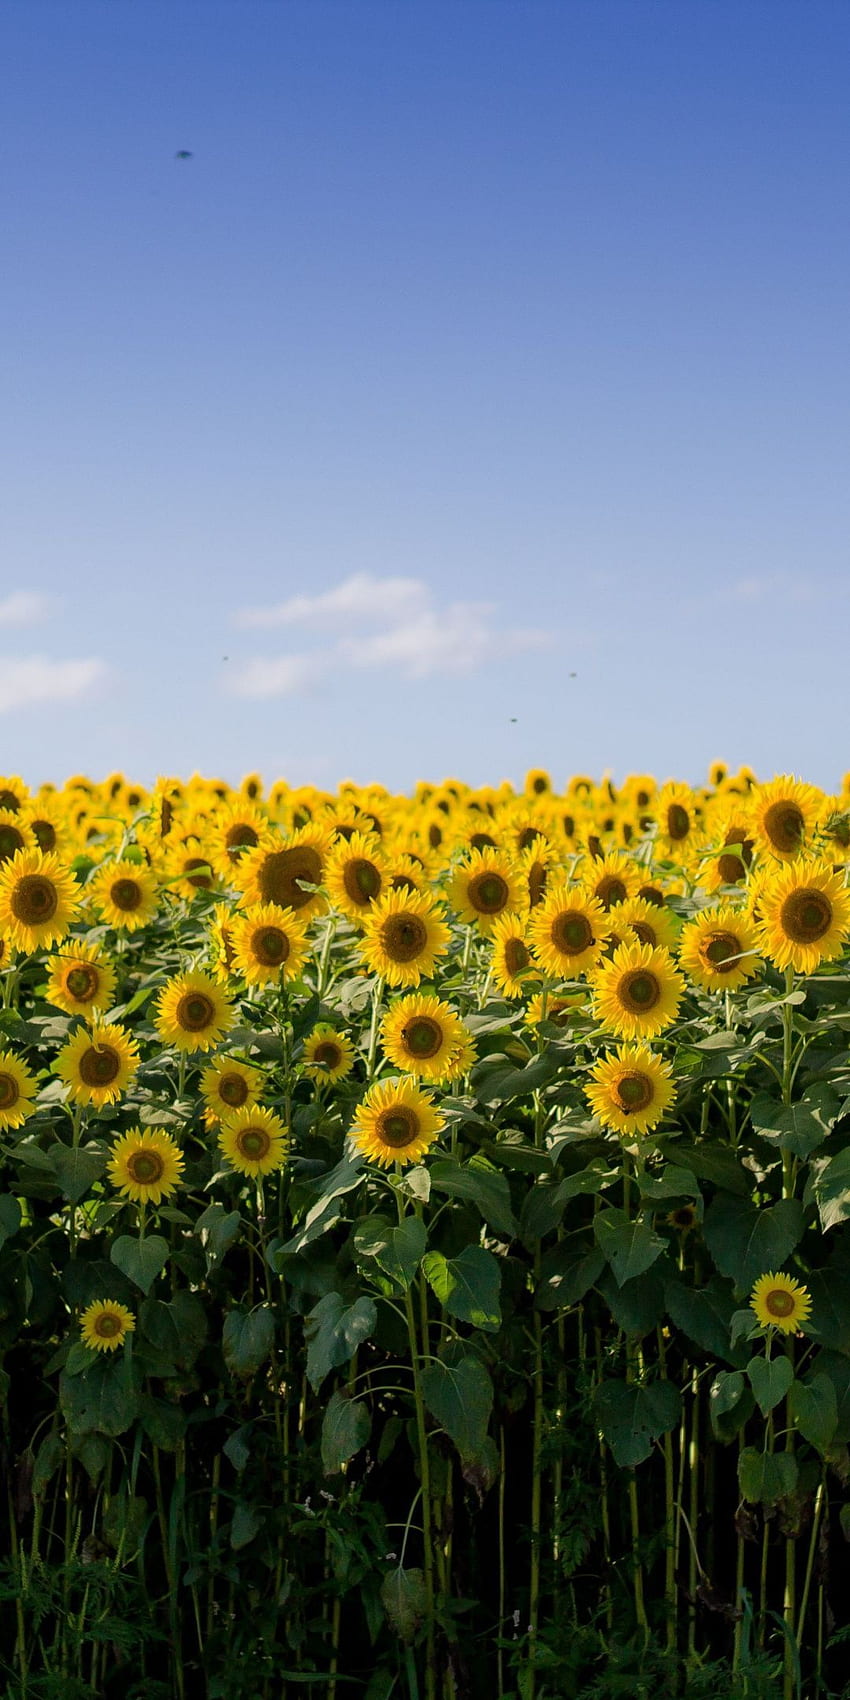 A field of sunflowers with birds flying in the sky - Farm